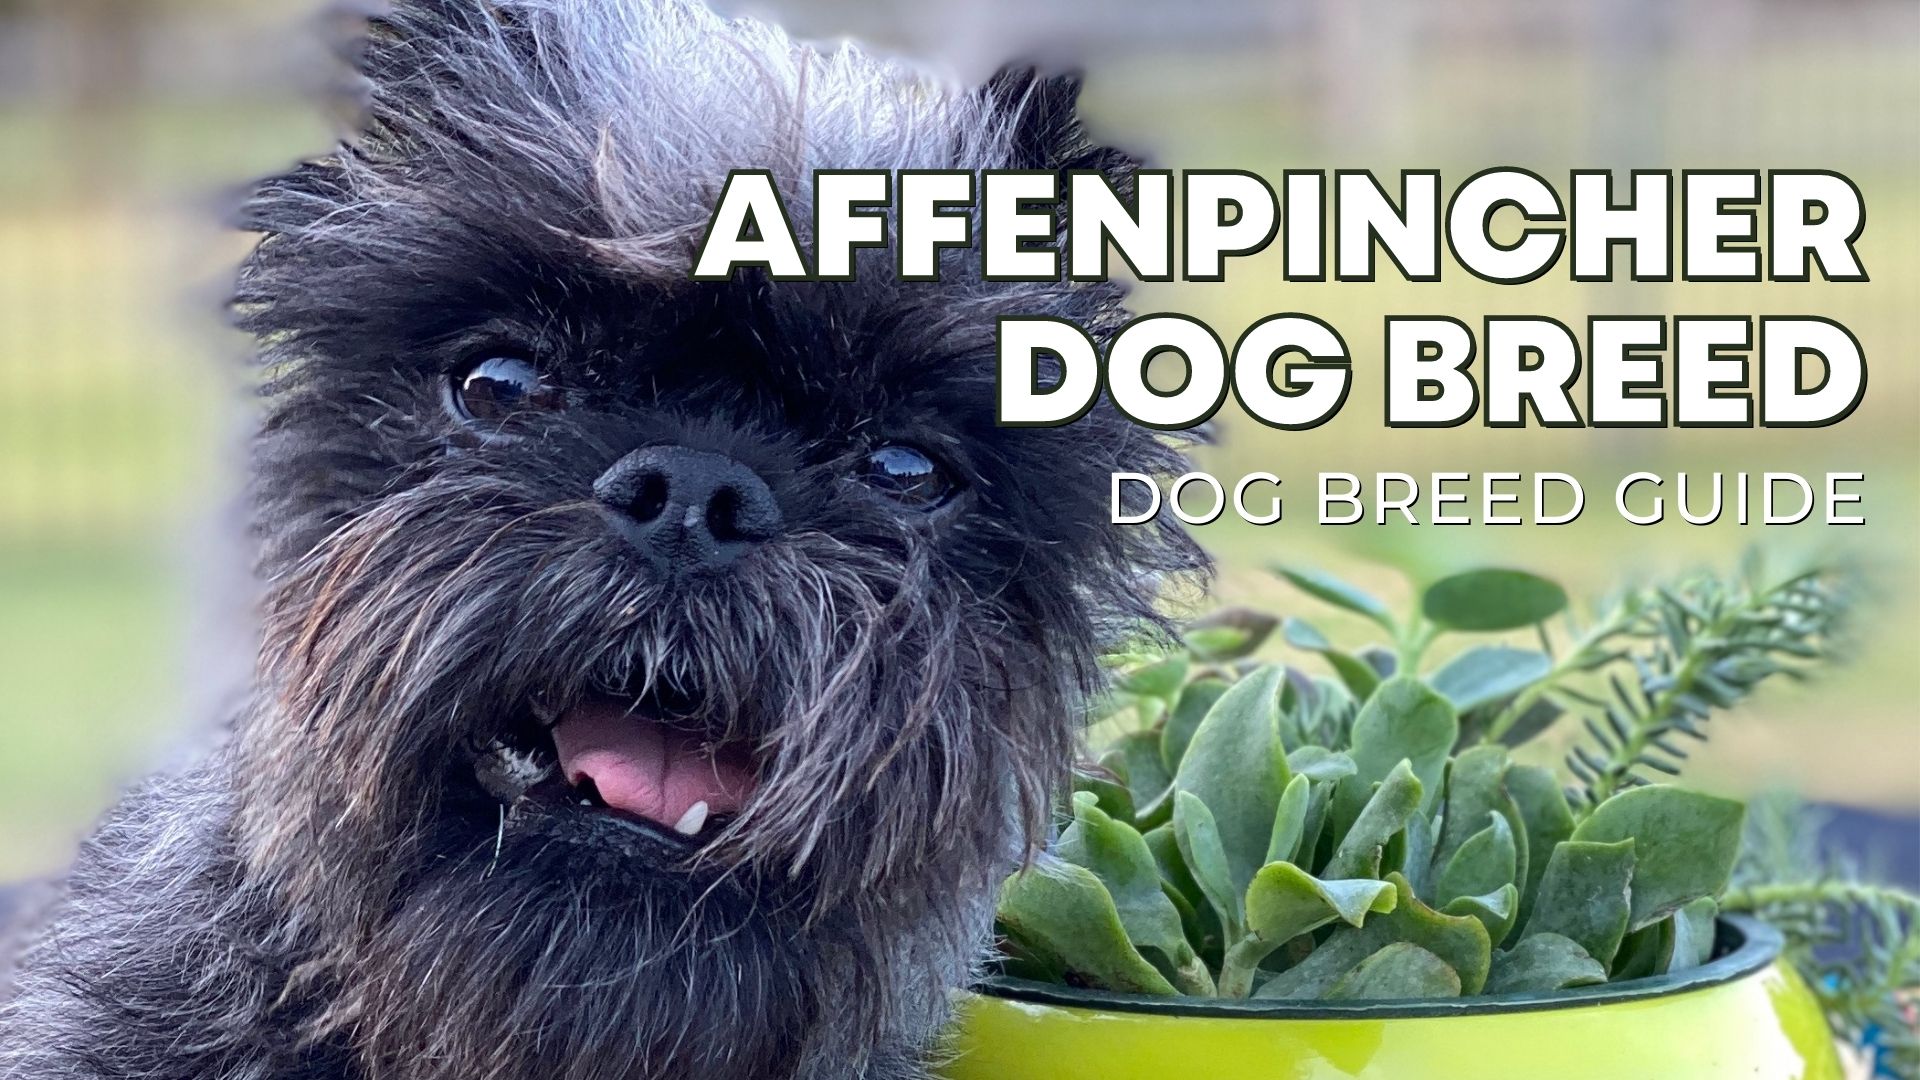 Affenpinscher Dog Breed Guide: Facts, Health & Care